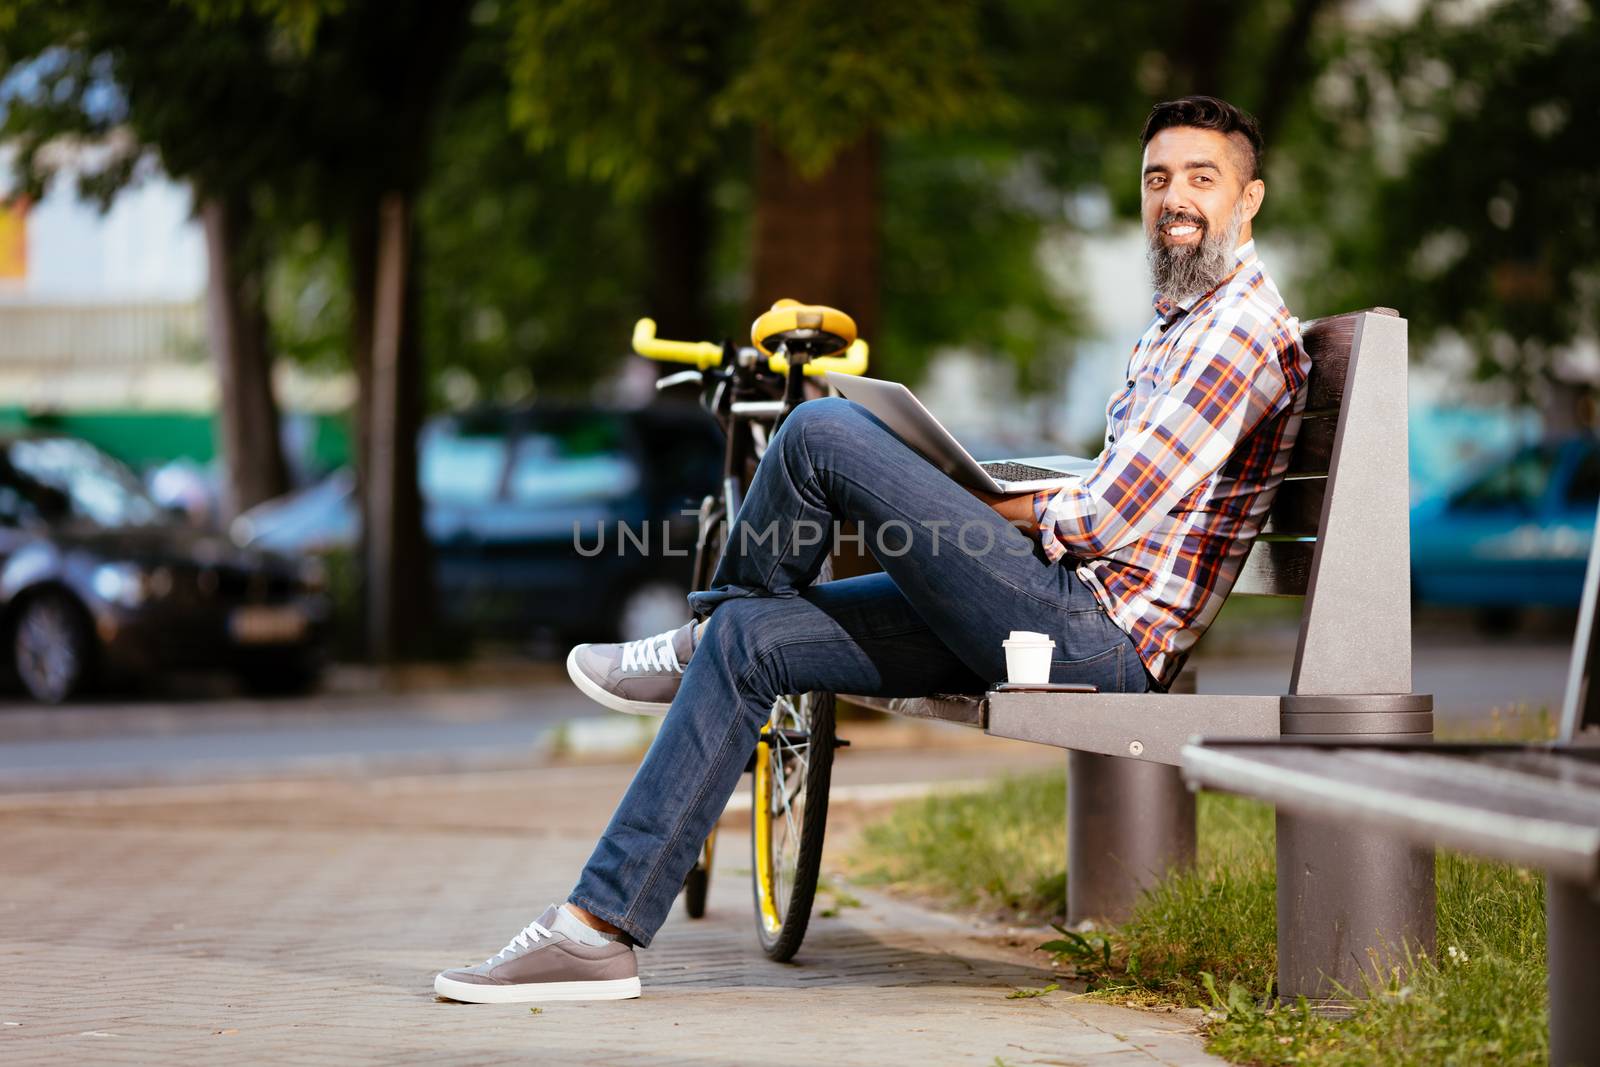 Casual businessman on a coffee break. He is sitting on a bench and working at laptop, next the bench rests a bike.